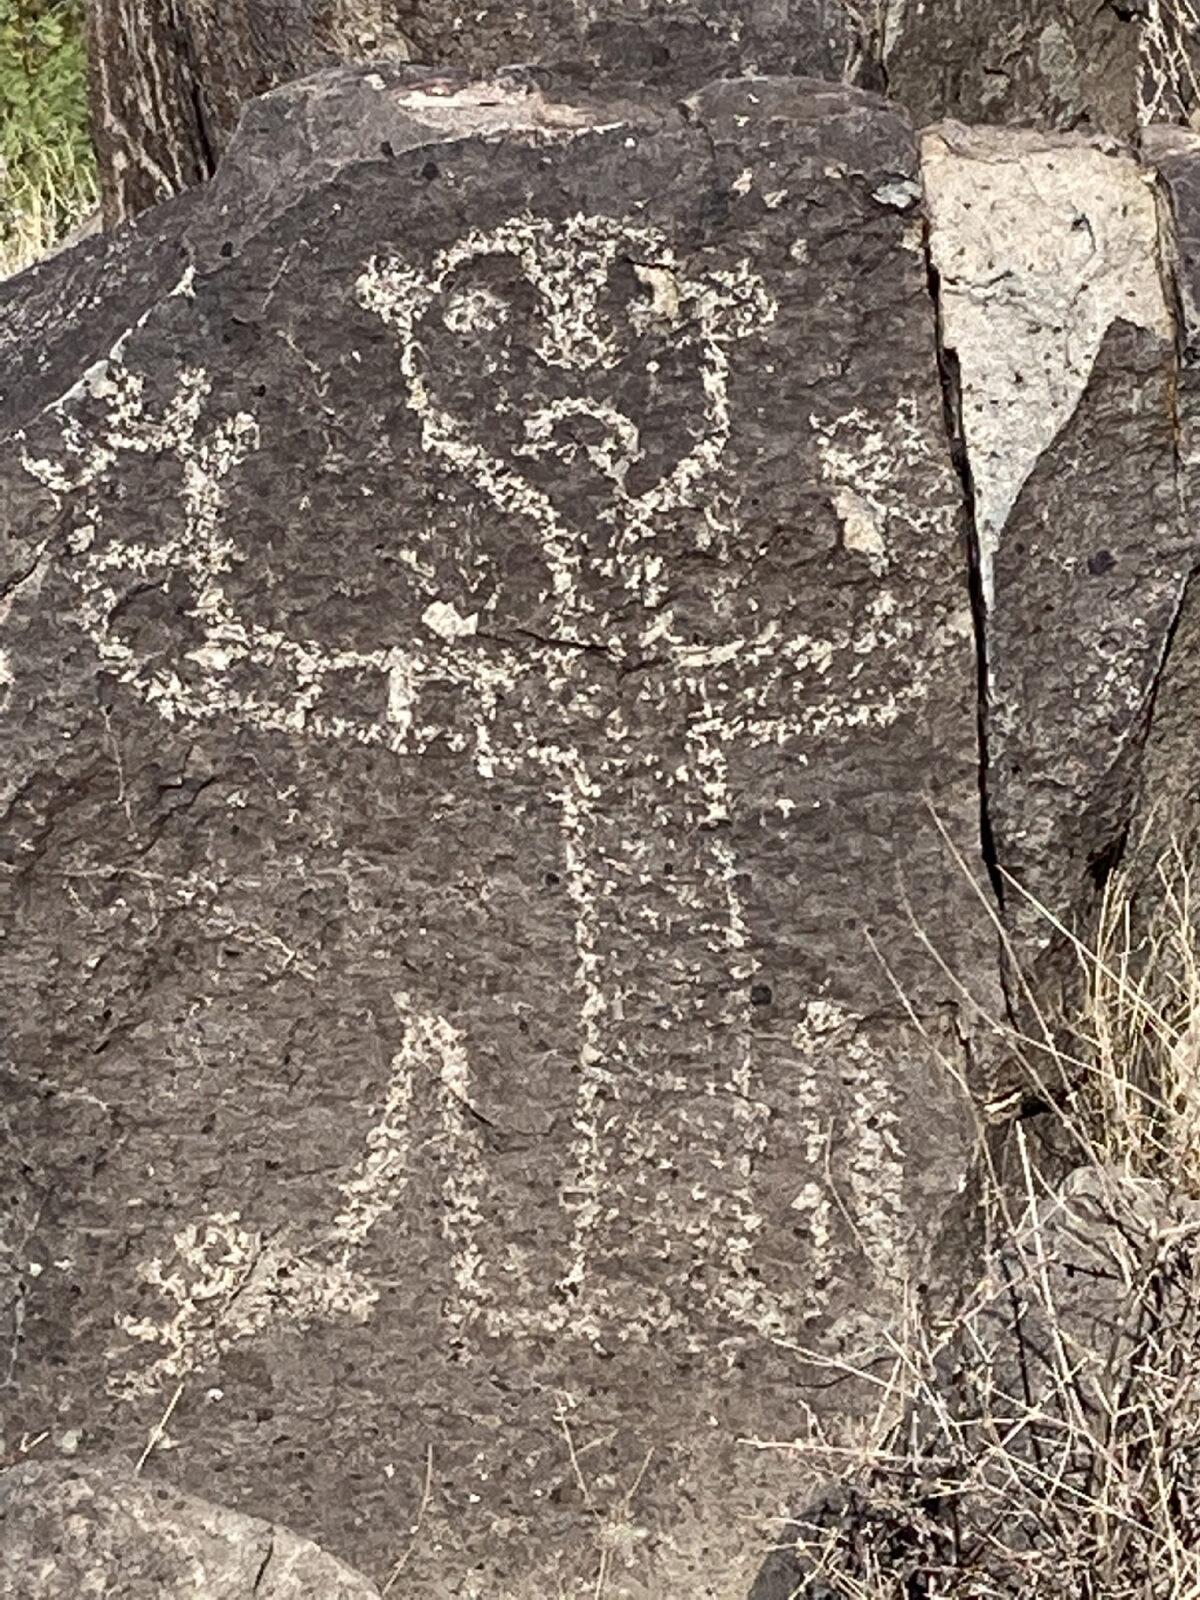 A human-looking petroglyph can be found at the Three Rivers Petroglyph Site in Tularosa, N.M. (Bill Neely)